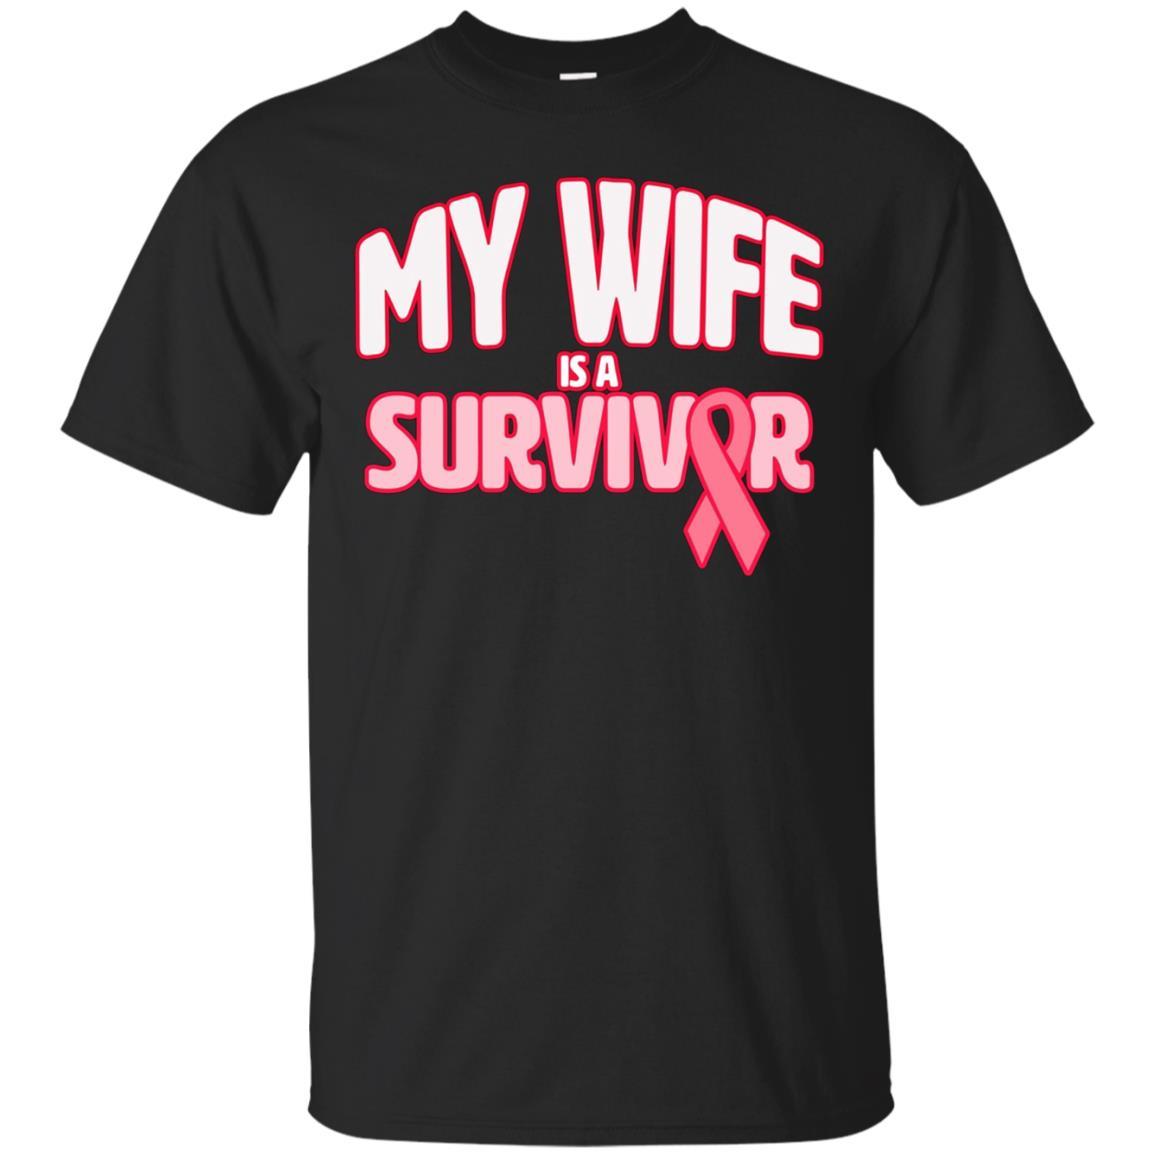 My Wife Is A Survivor - Breast Cancer Awareness T-shirt